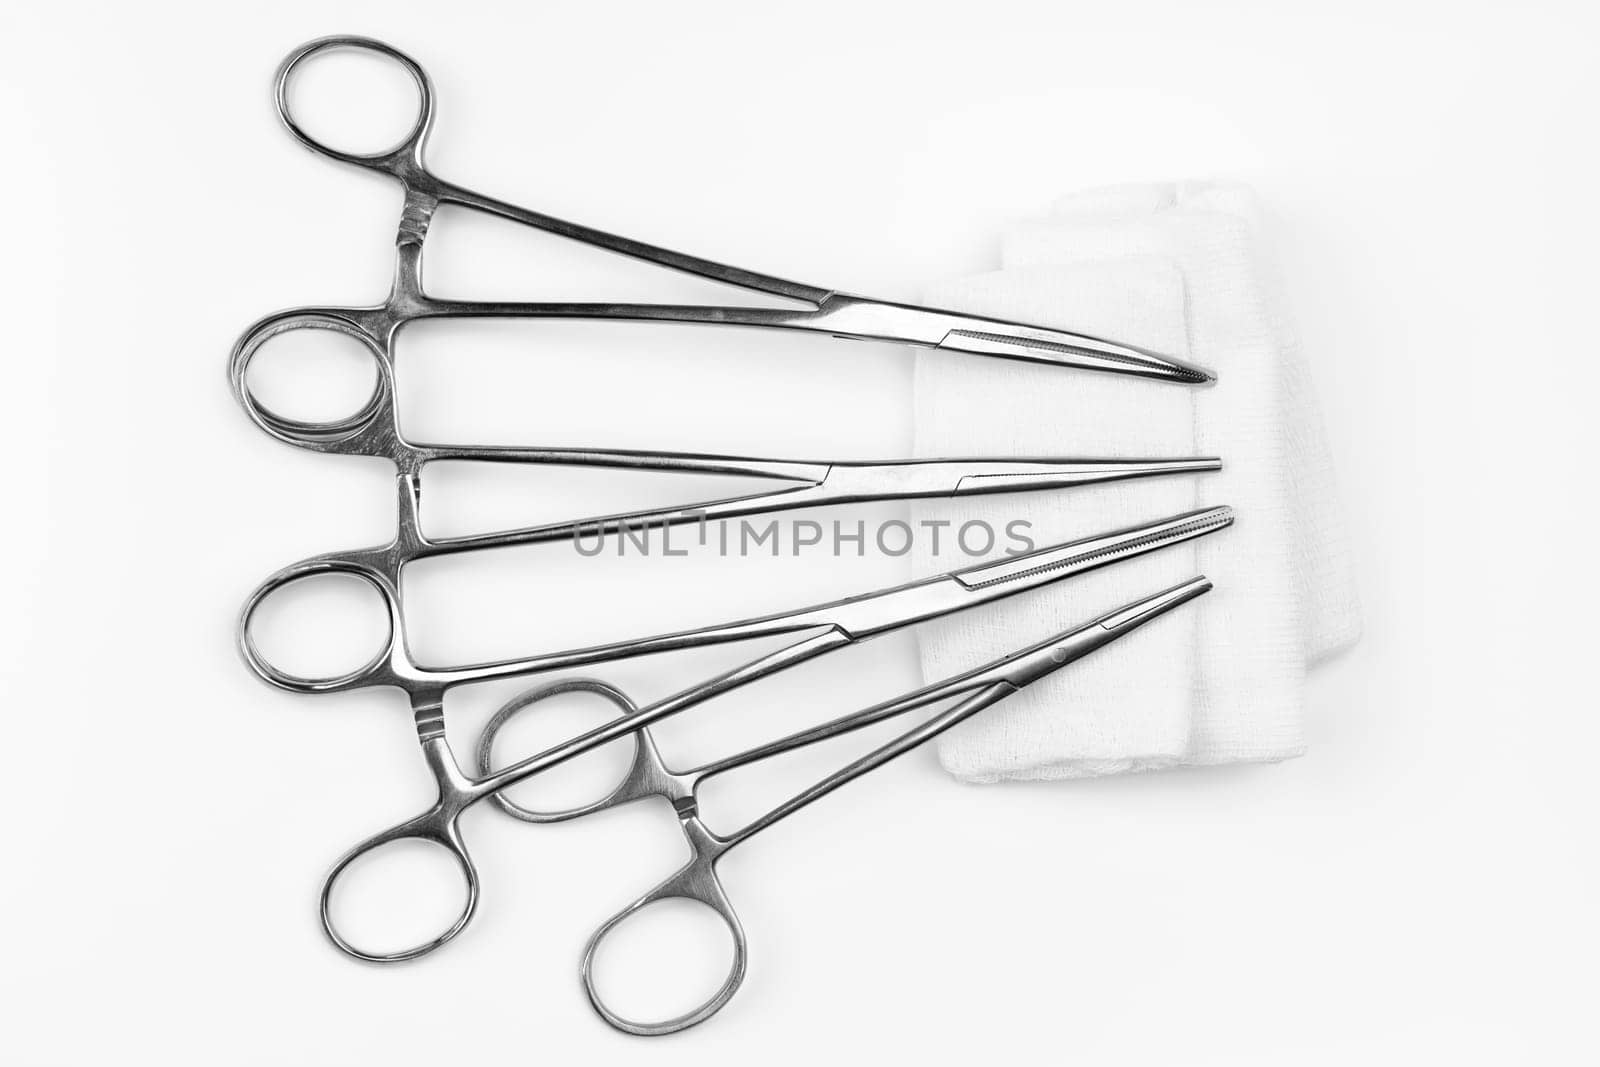 Lot of stainless surgical needle drivers lying on white sterile gauze swab. Medical instruments needle holders on white background. Healthcare and medicine concept. Flat shot, selective focus